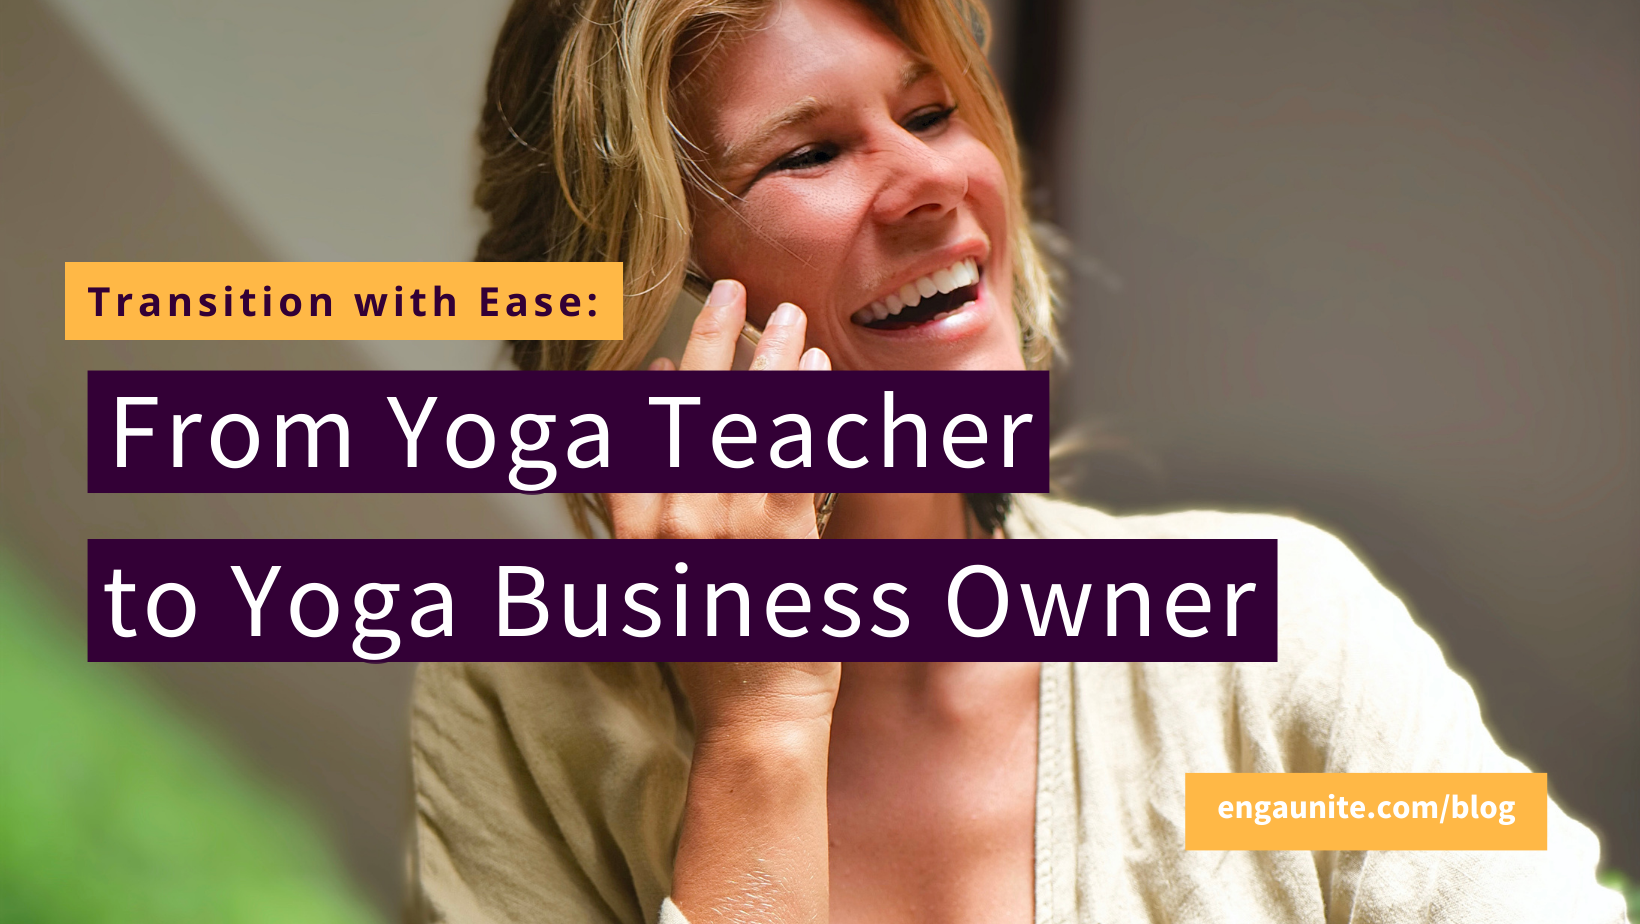 From Yoga Teacher to Yoga Business Owner: Transition with Ease